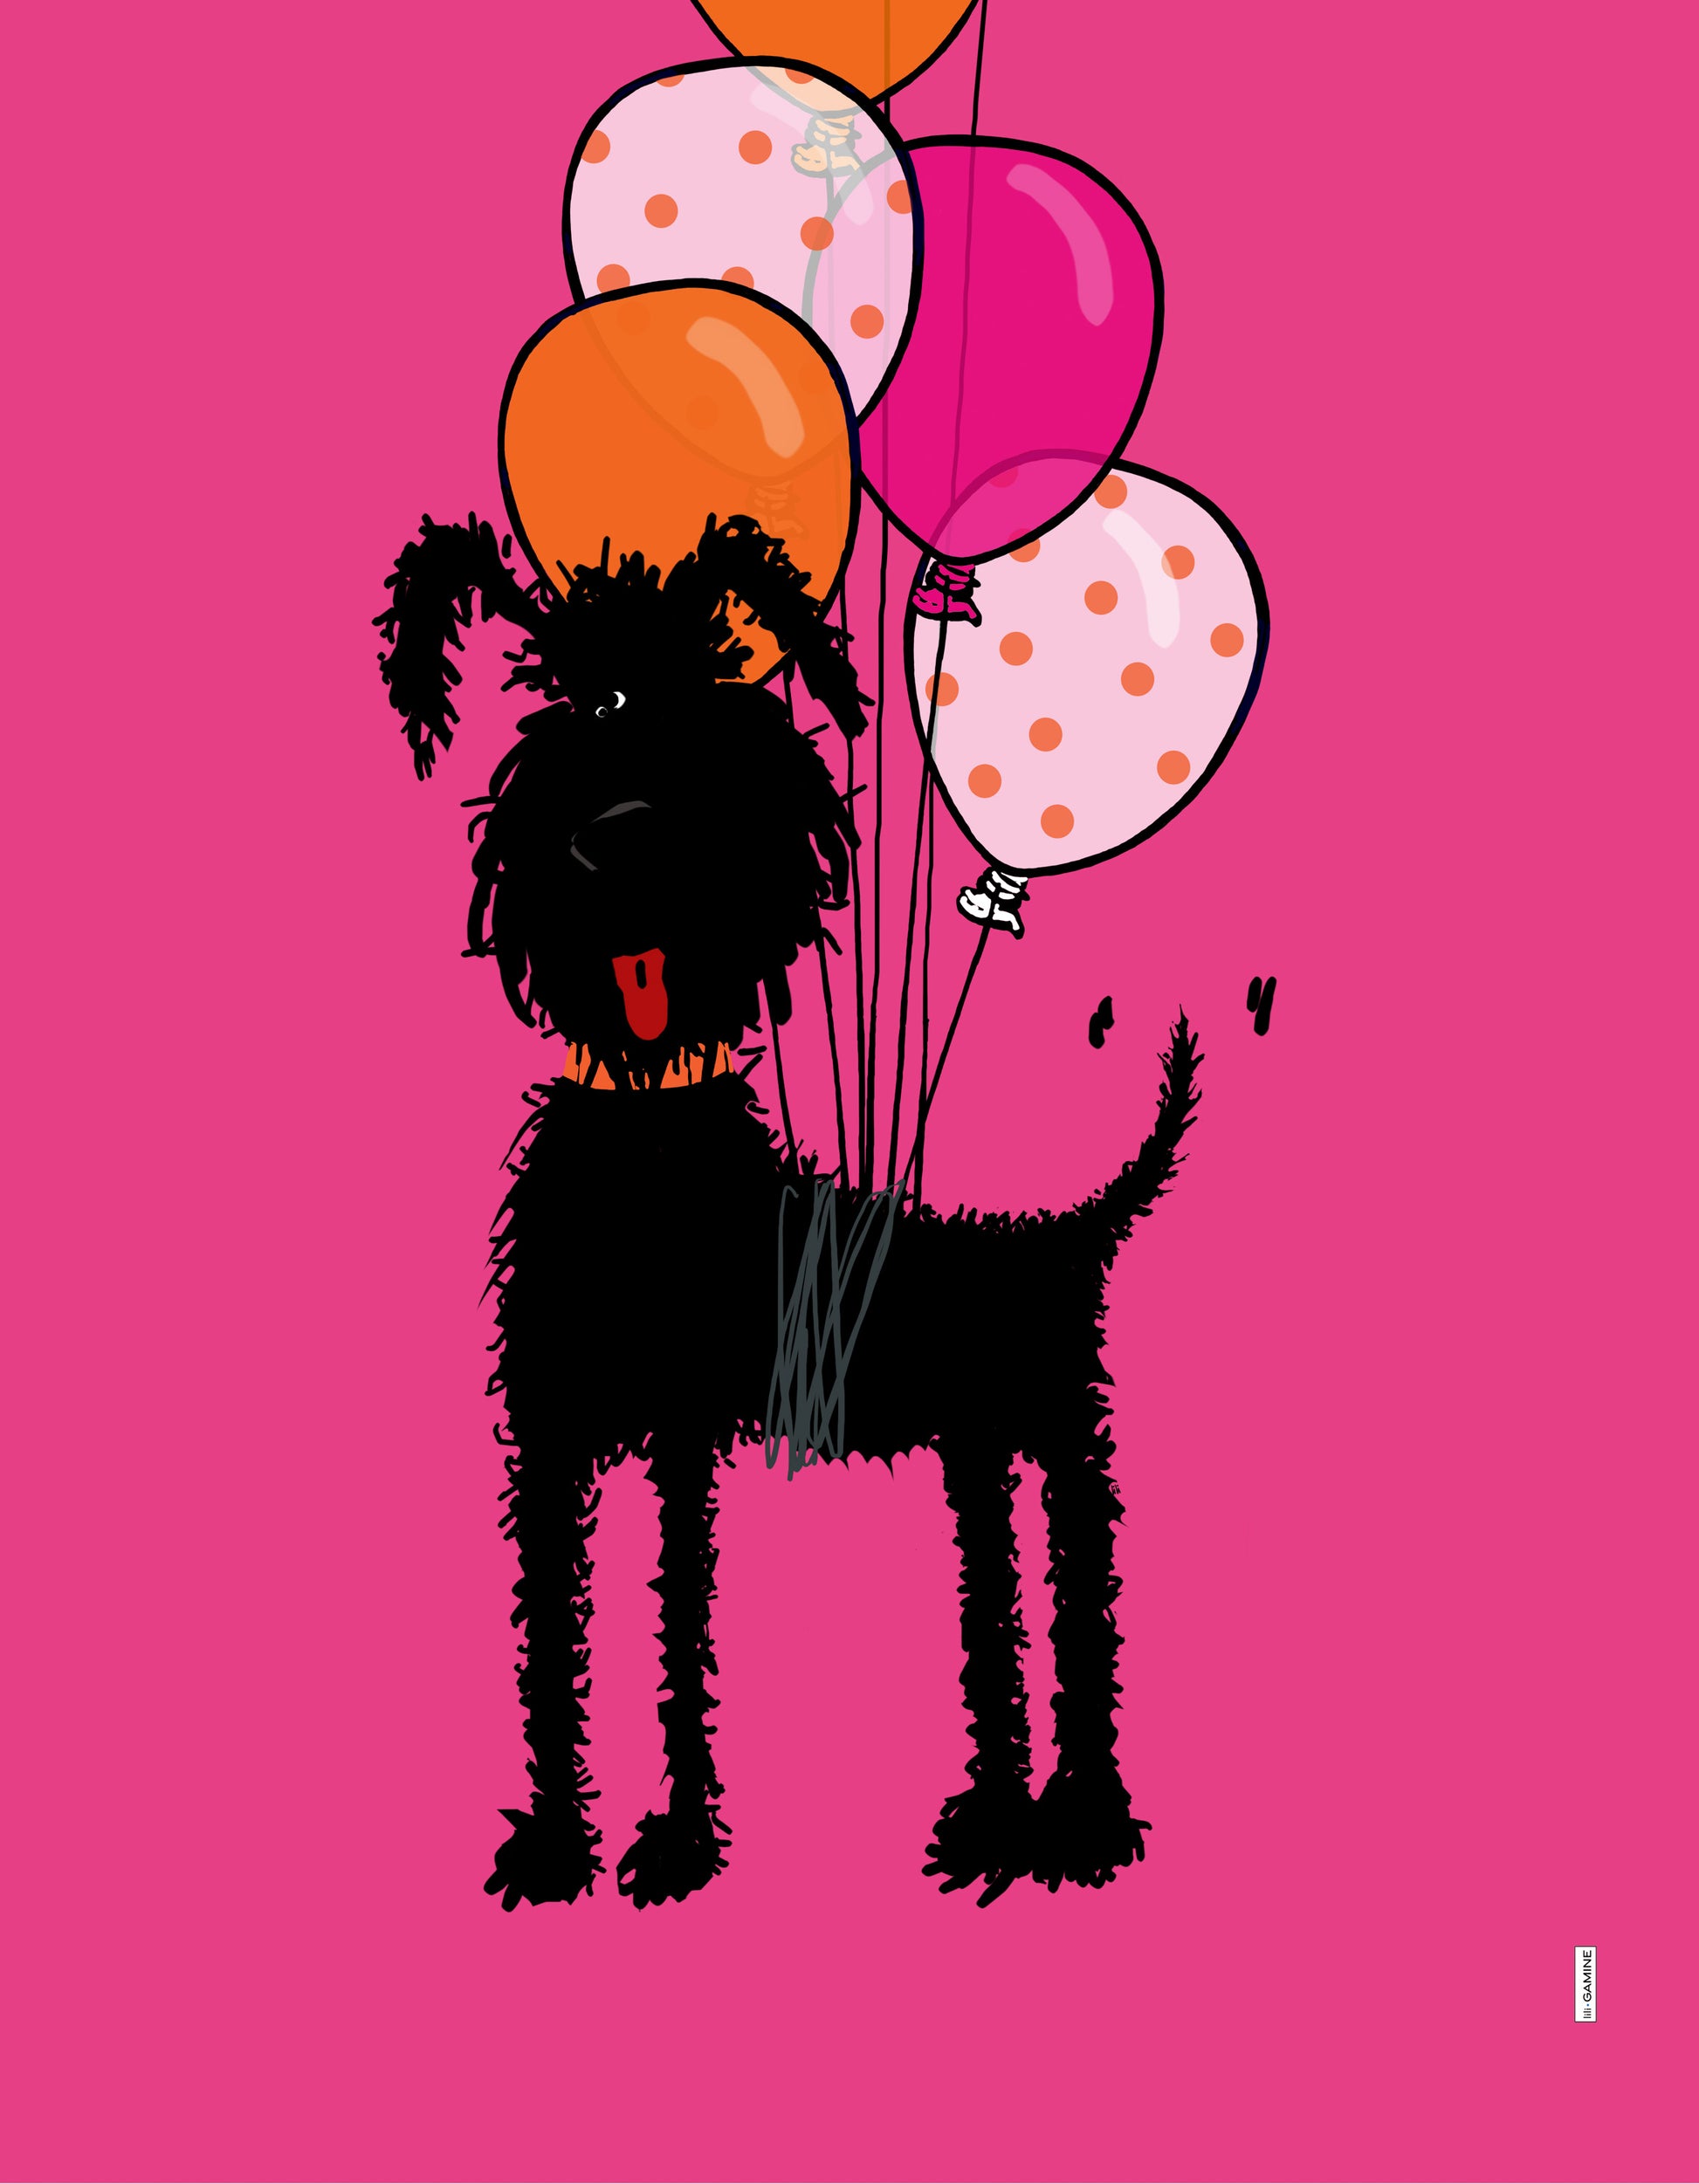 Dog with Balloons by Lili Gamine